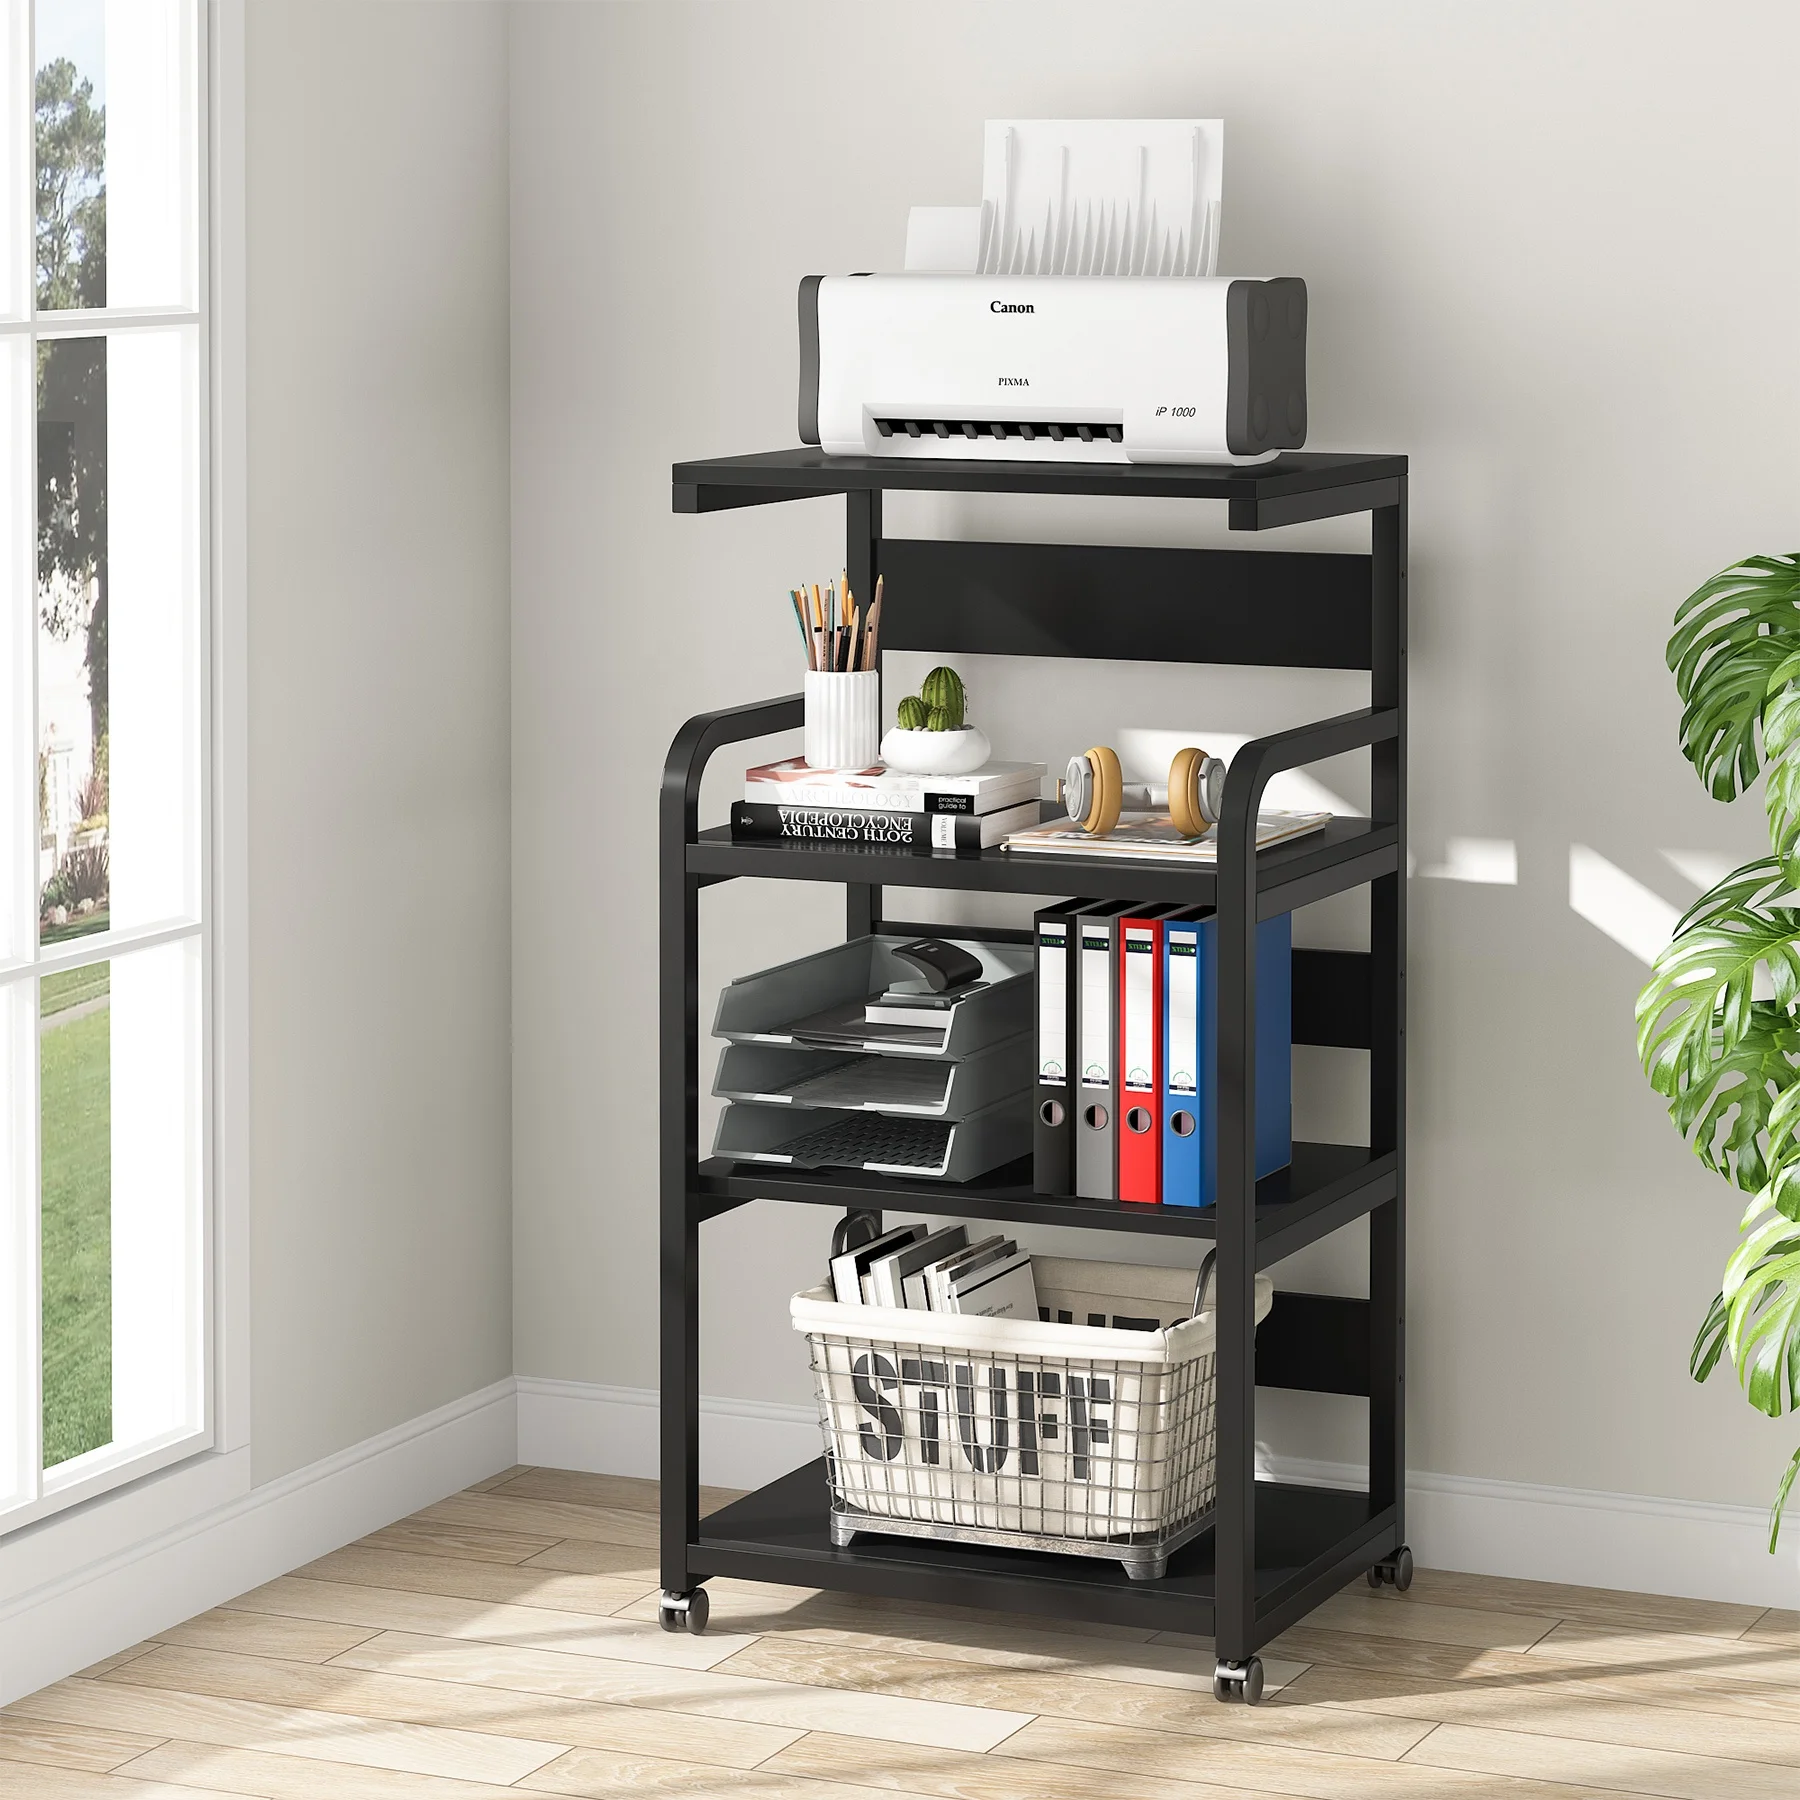 Tribesigns Large Modern Printer Cart 4-Shelf Mobile Printer Stand with Storage Shelves for Home Office